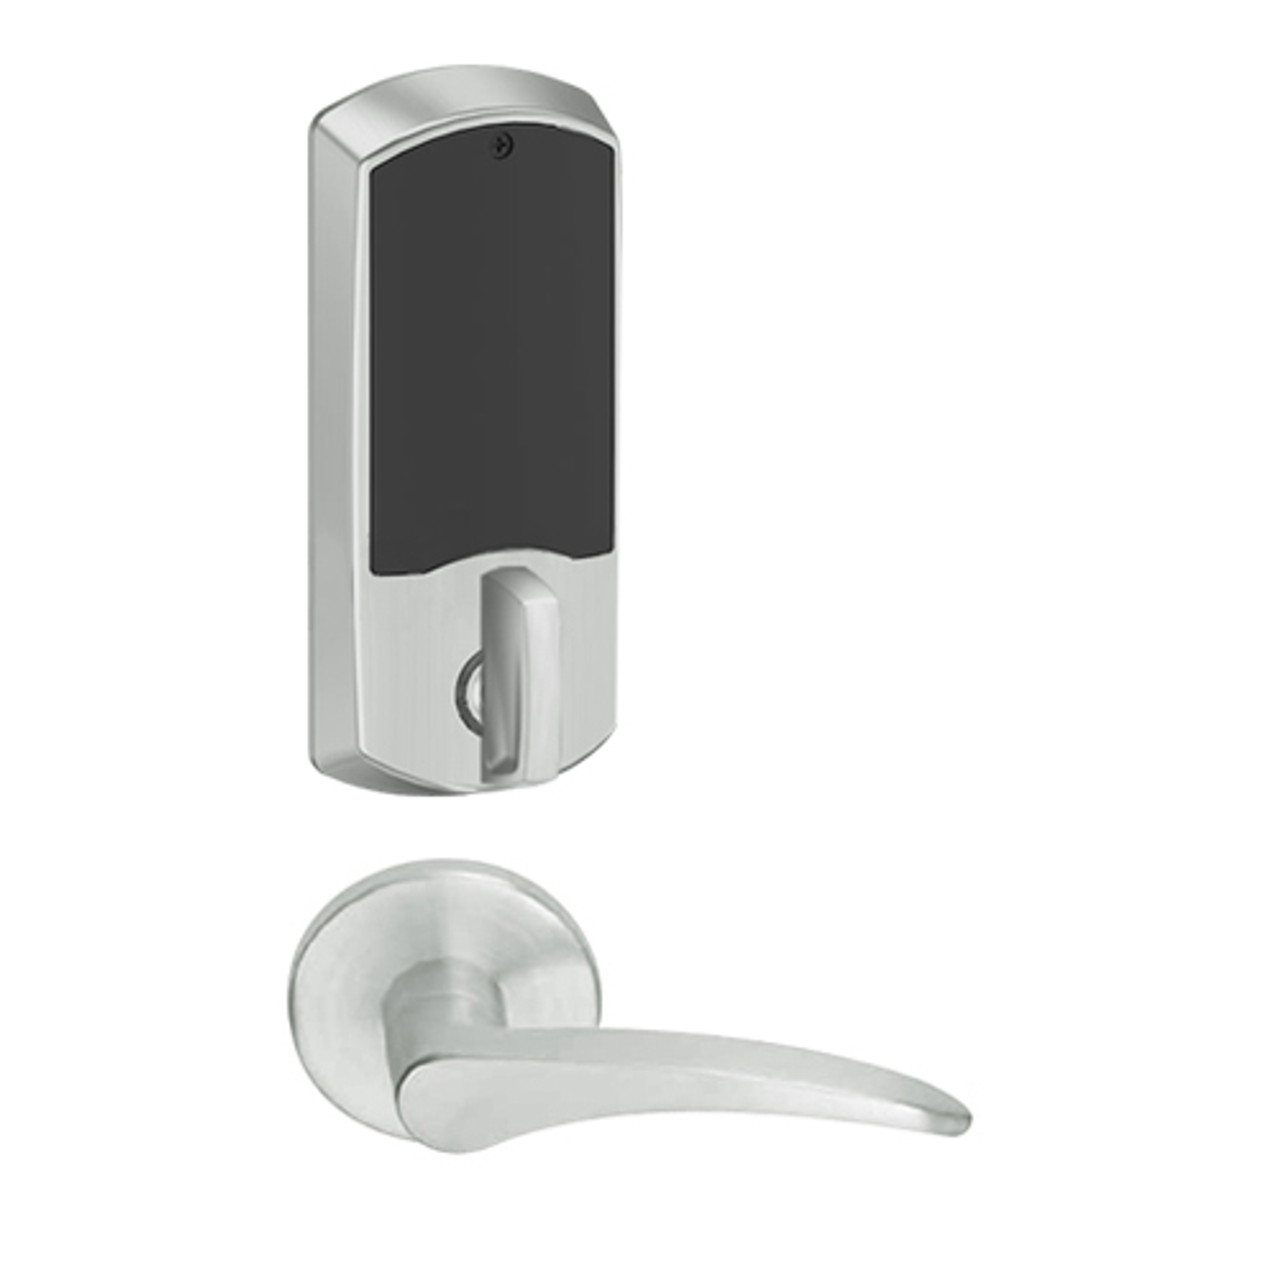 LEMD-GRW-L-12-619-00B-RH Schlage Less Cylinder Privacy/Apartment Wireless Greenwich Mortise Deadbolt Lock with LED and 12 Lever in Satin Nickel